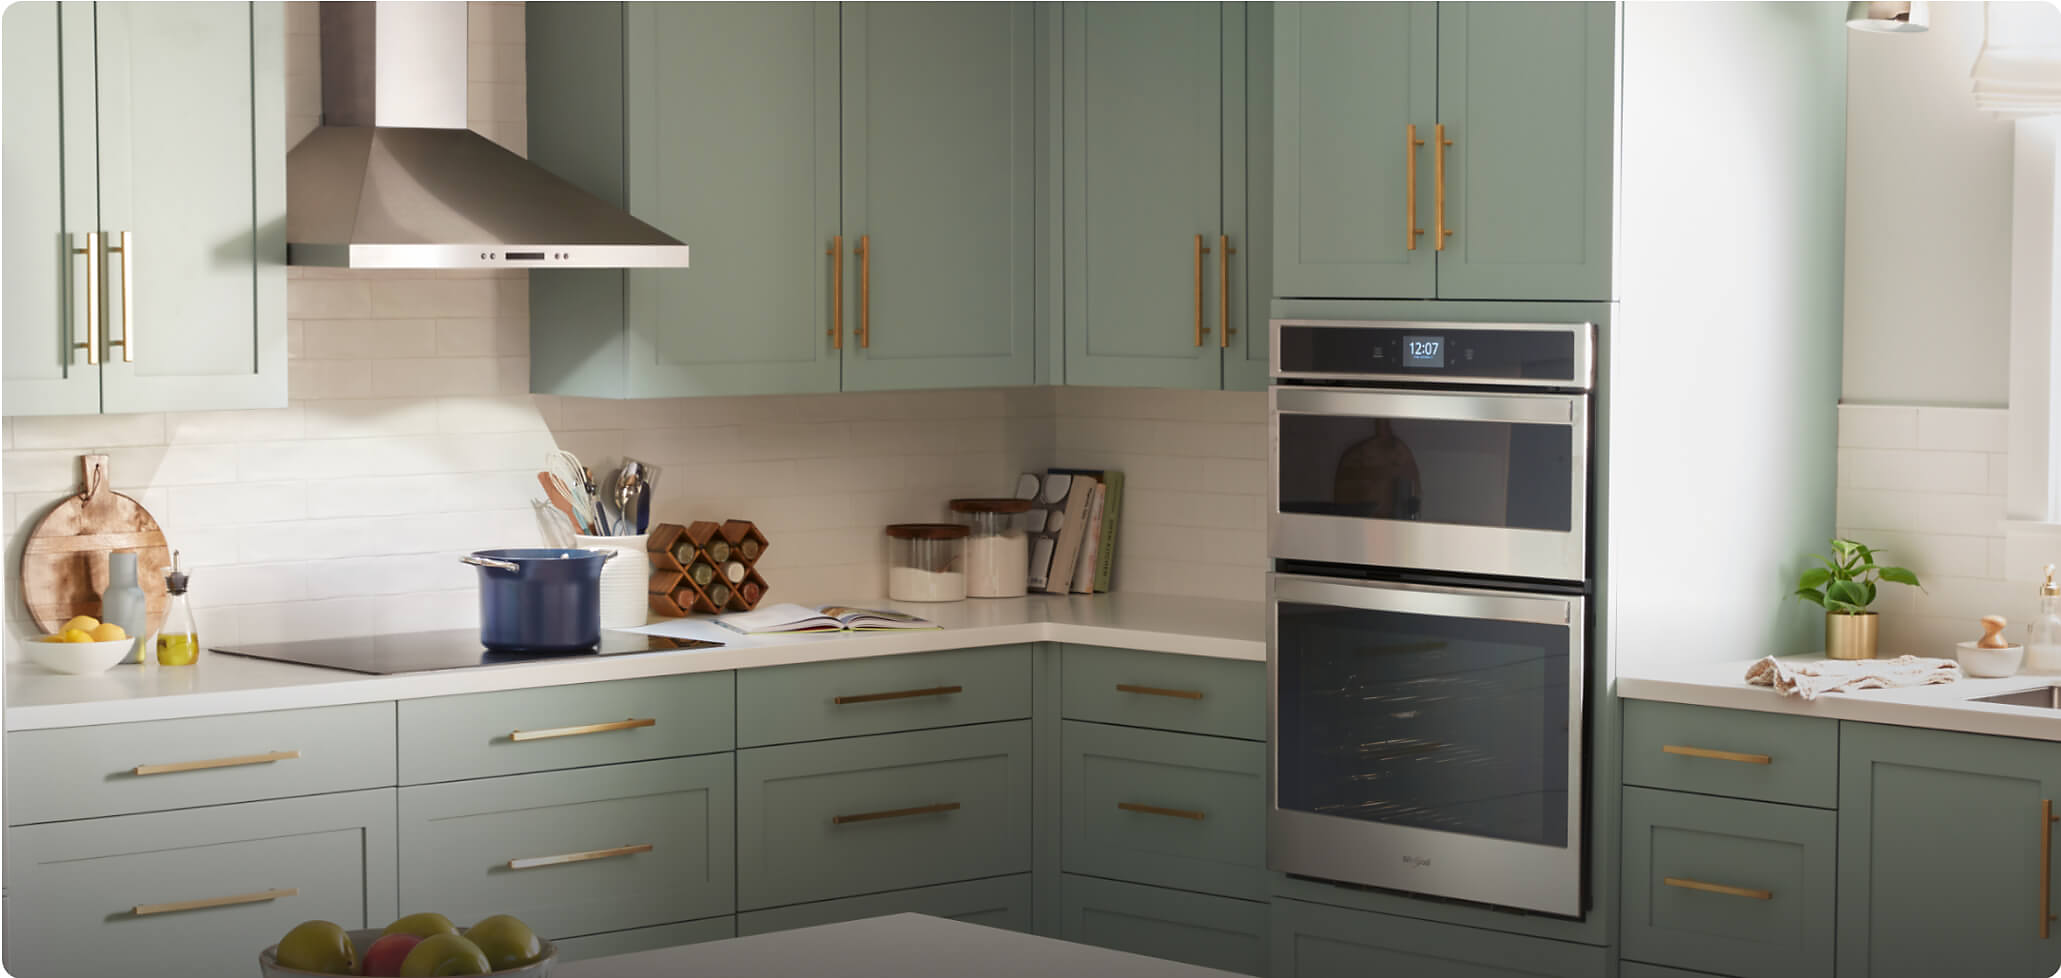 Whirlpool® Wall Oven Microwave Combination, Electric Cooktop and Wall Mount Range Hood in a kitchen with sage green cabinets